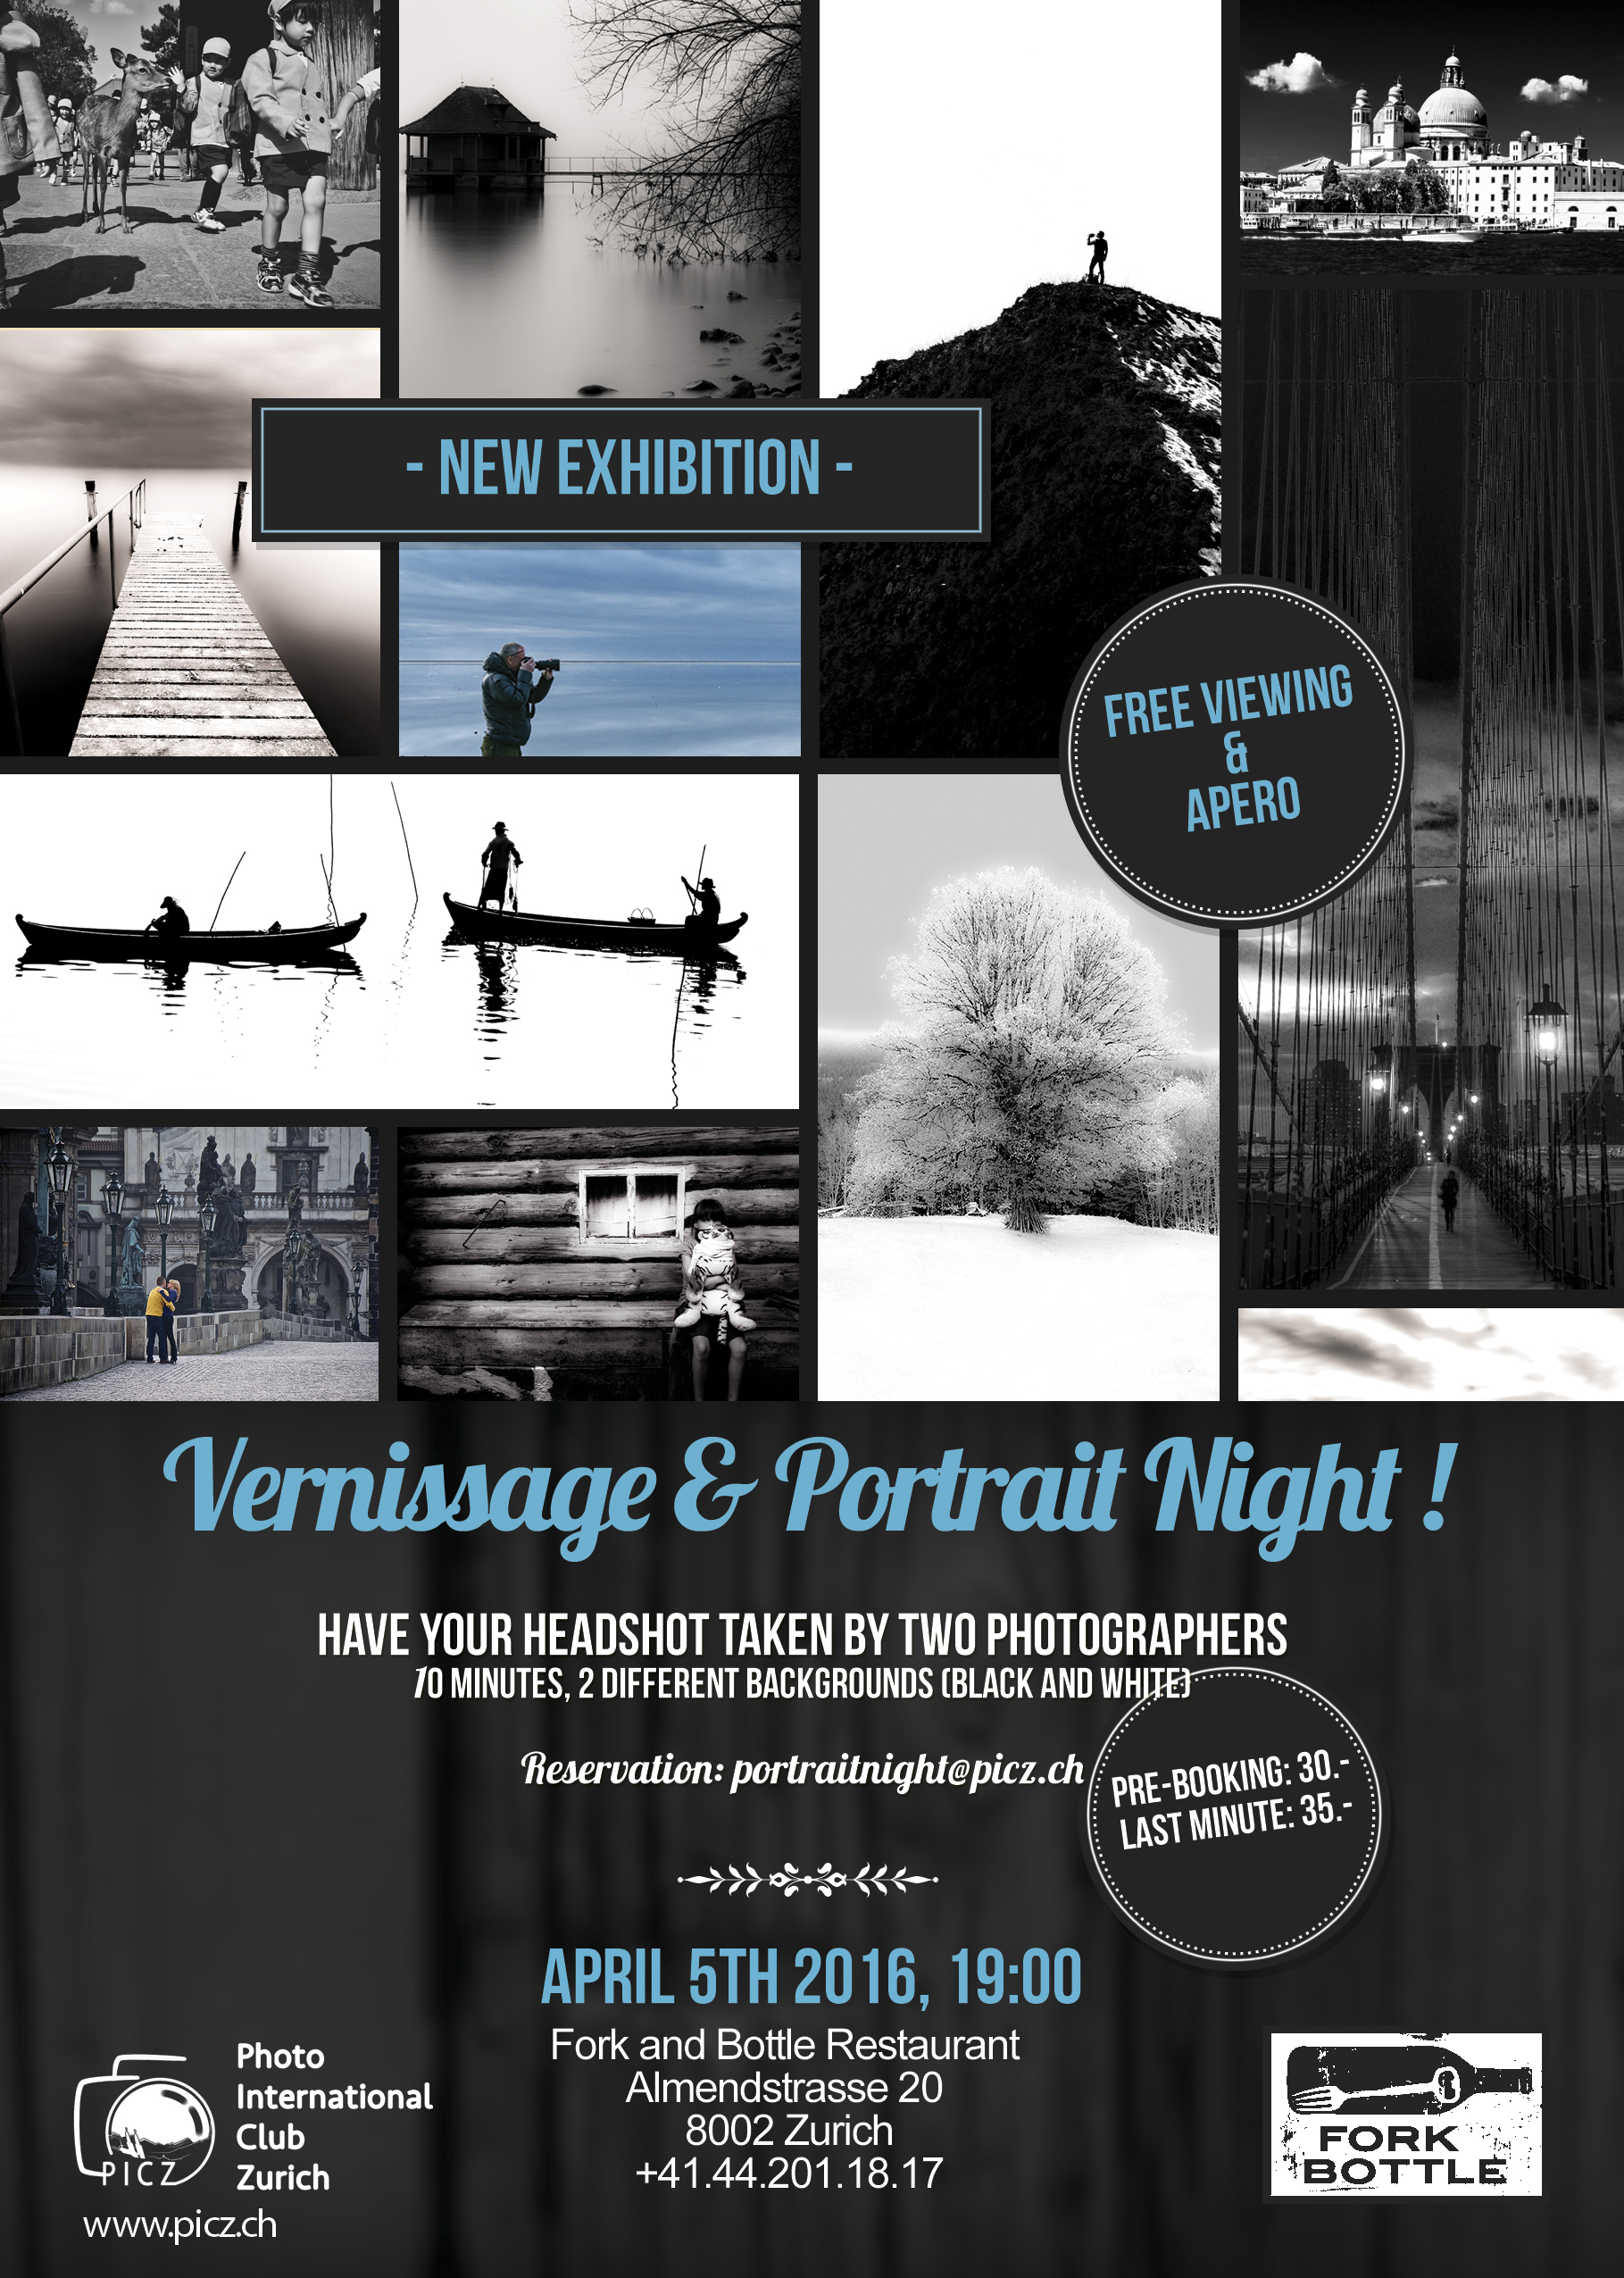 Vernissage of a new Photo Exhibition and Portrait Night